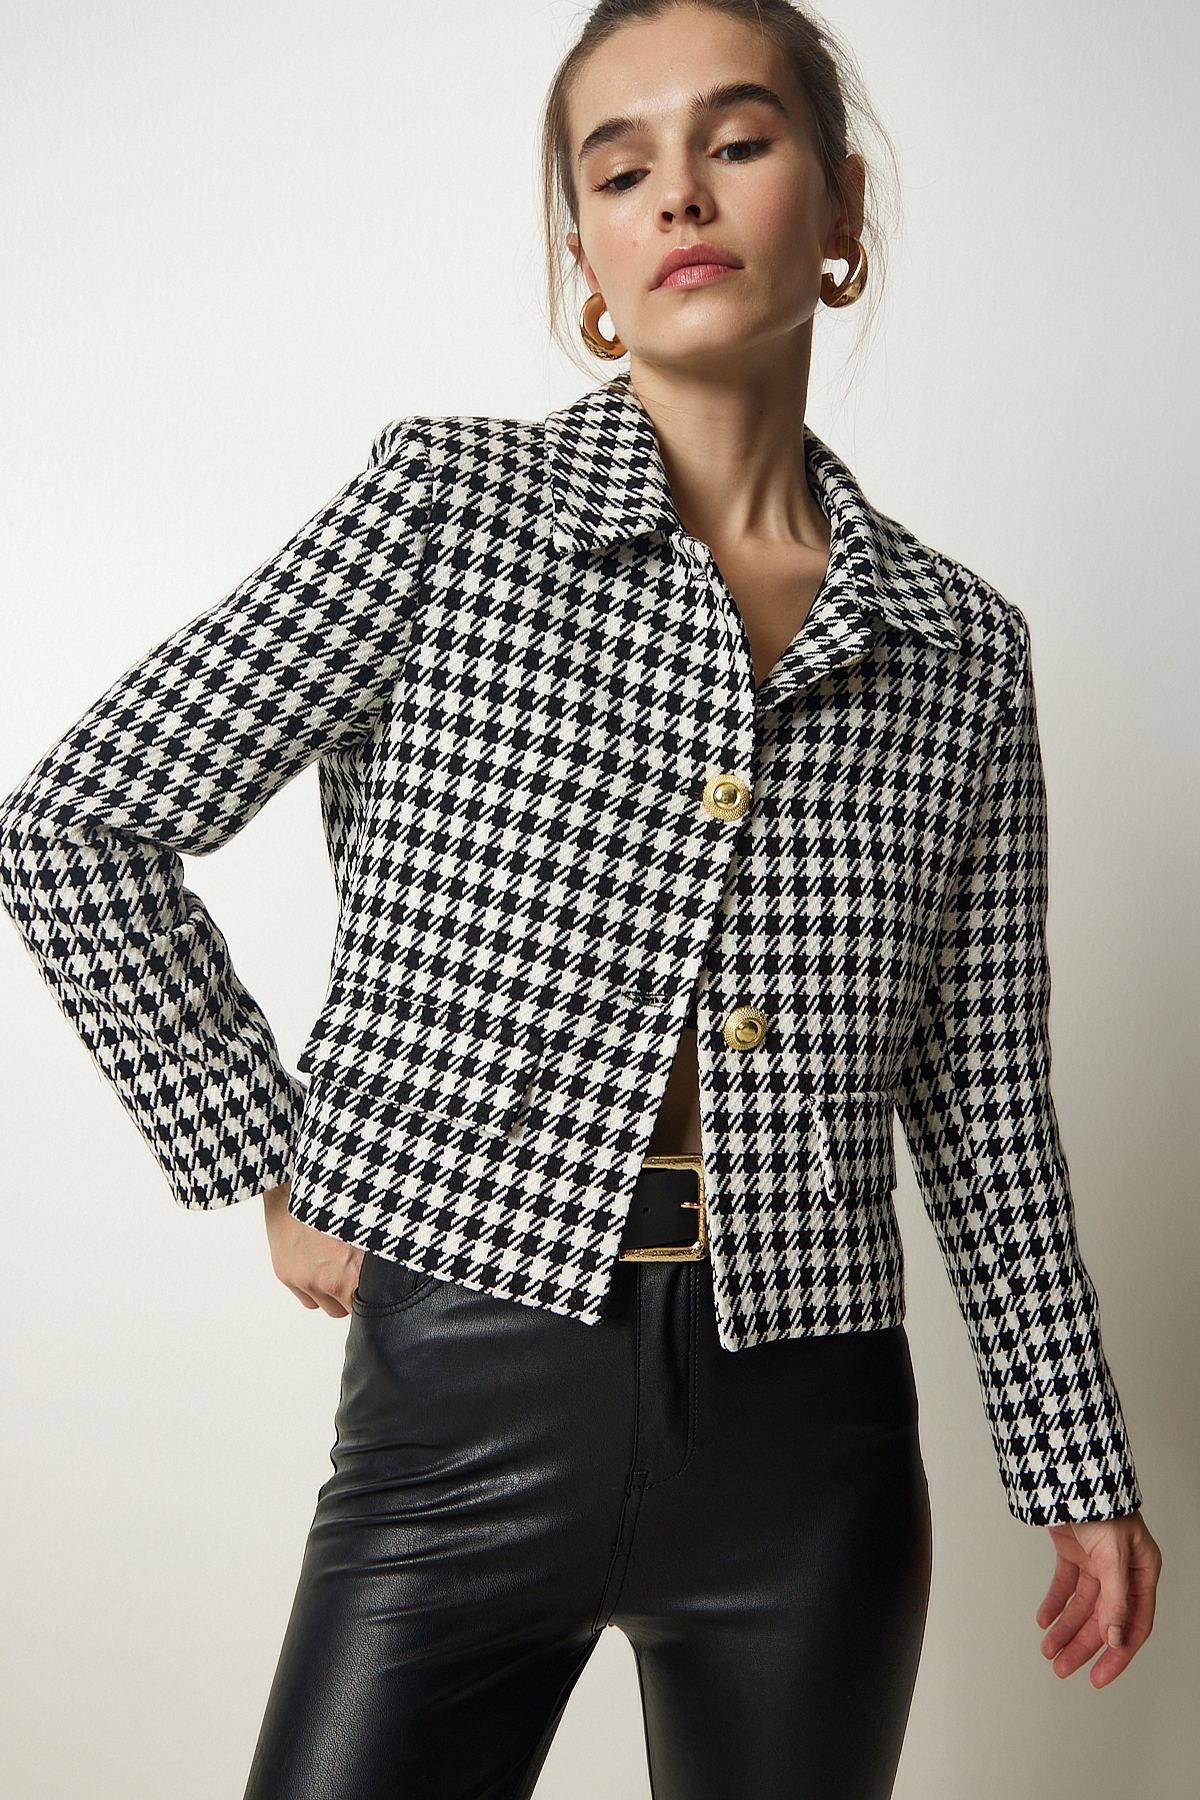 Levně Happiness İstanbul Women's Black and White Houndstooth Pattern Stylish Woven Jacket